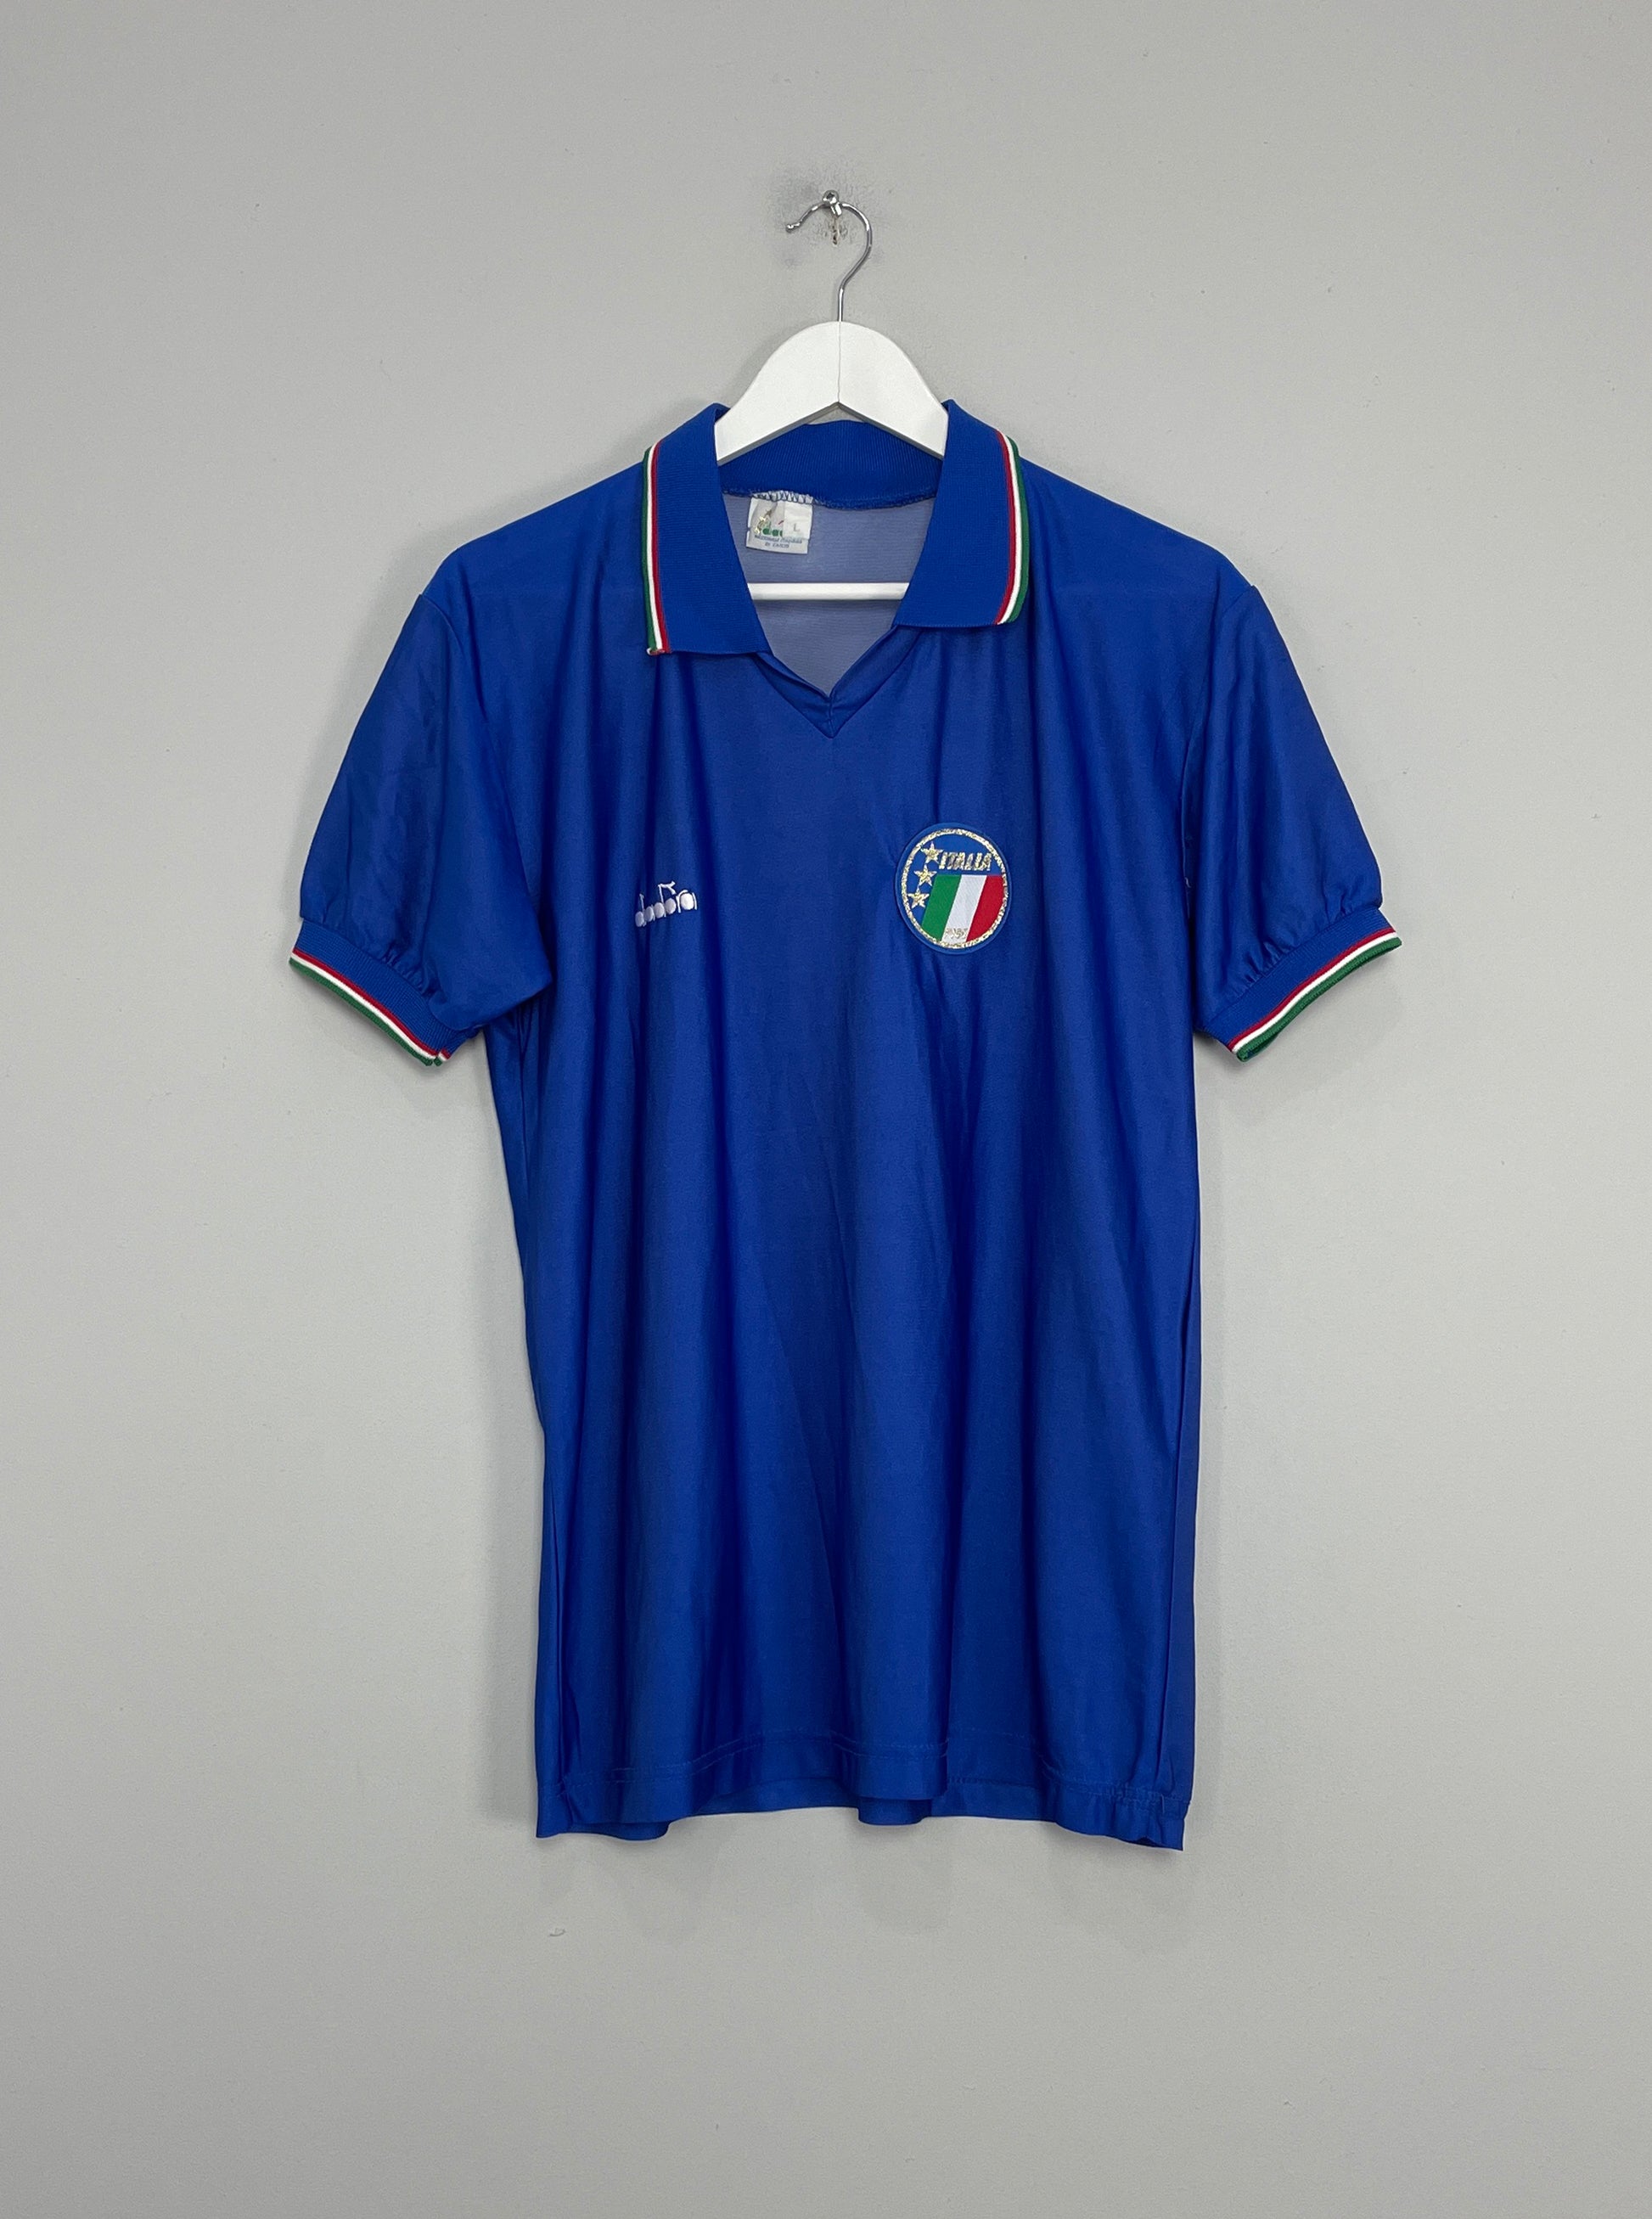 Image of the Italy shirt from the 1990/91 season